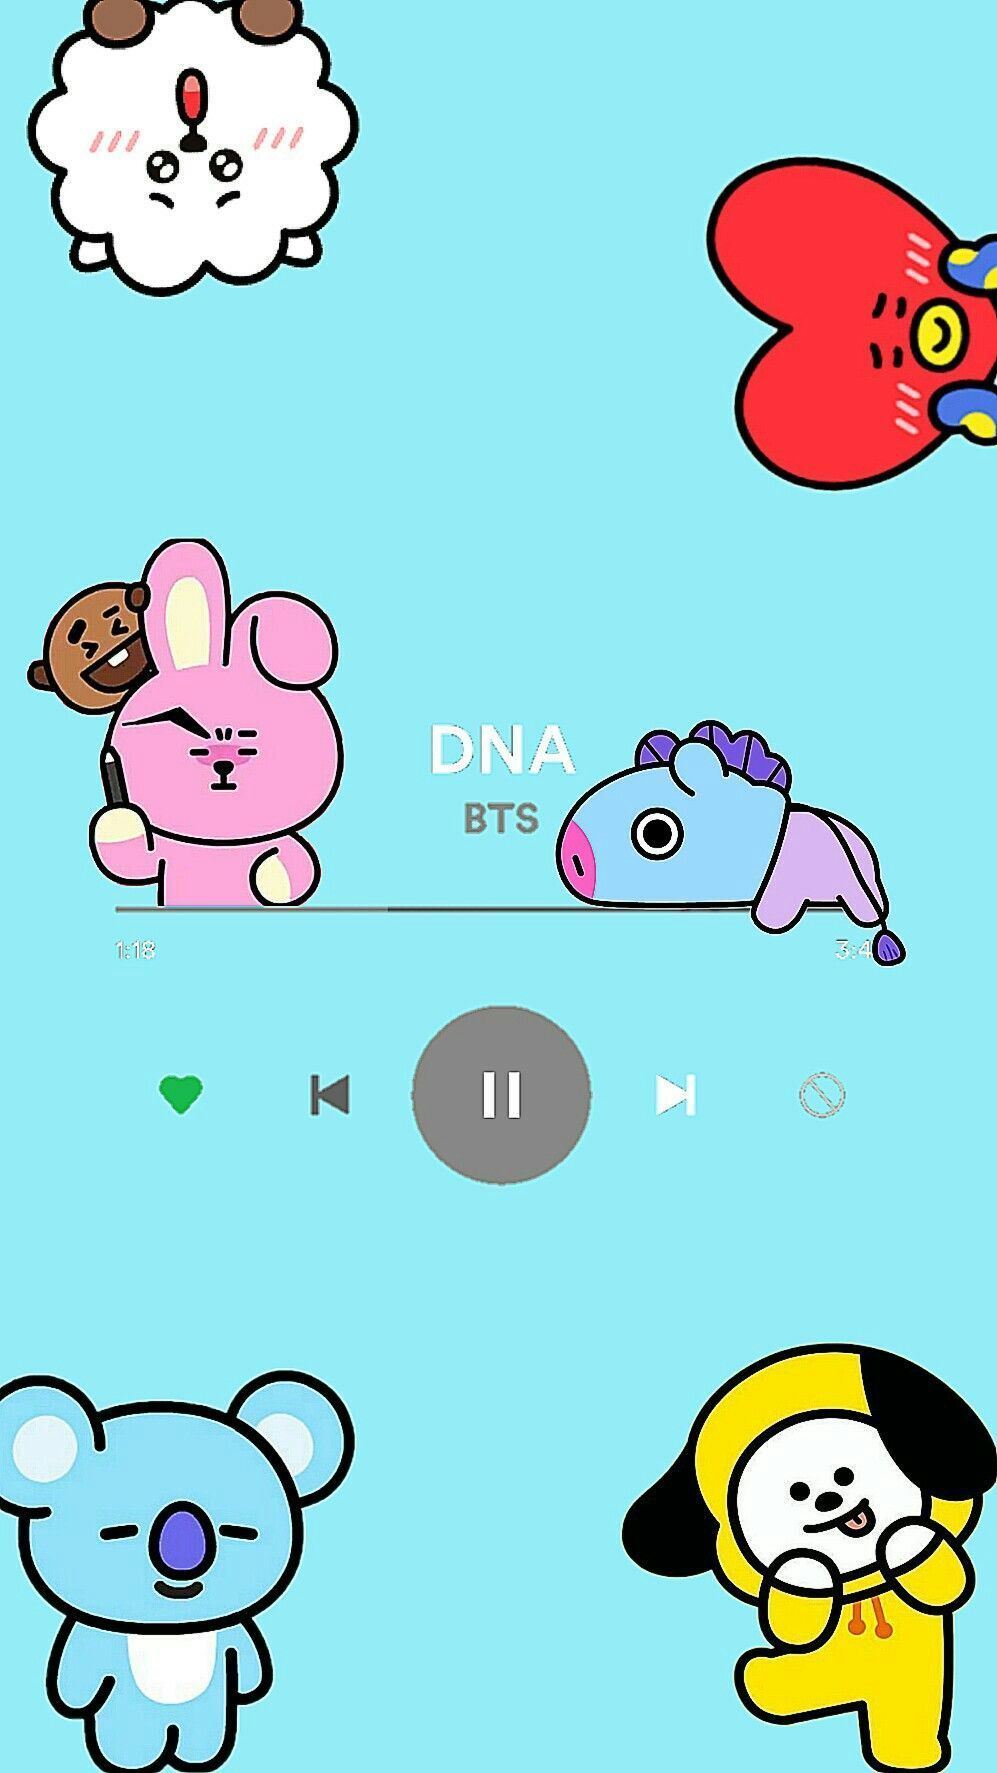 Bt21 And Bts Wallpapers Wallpaper Cave